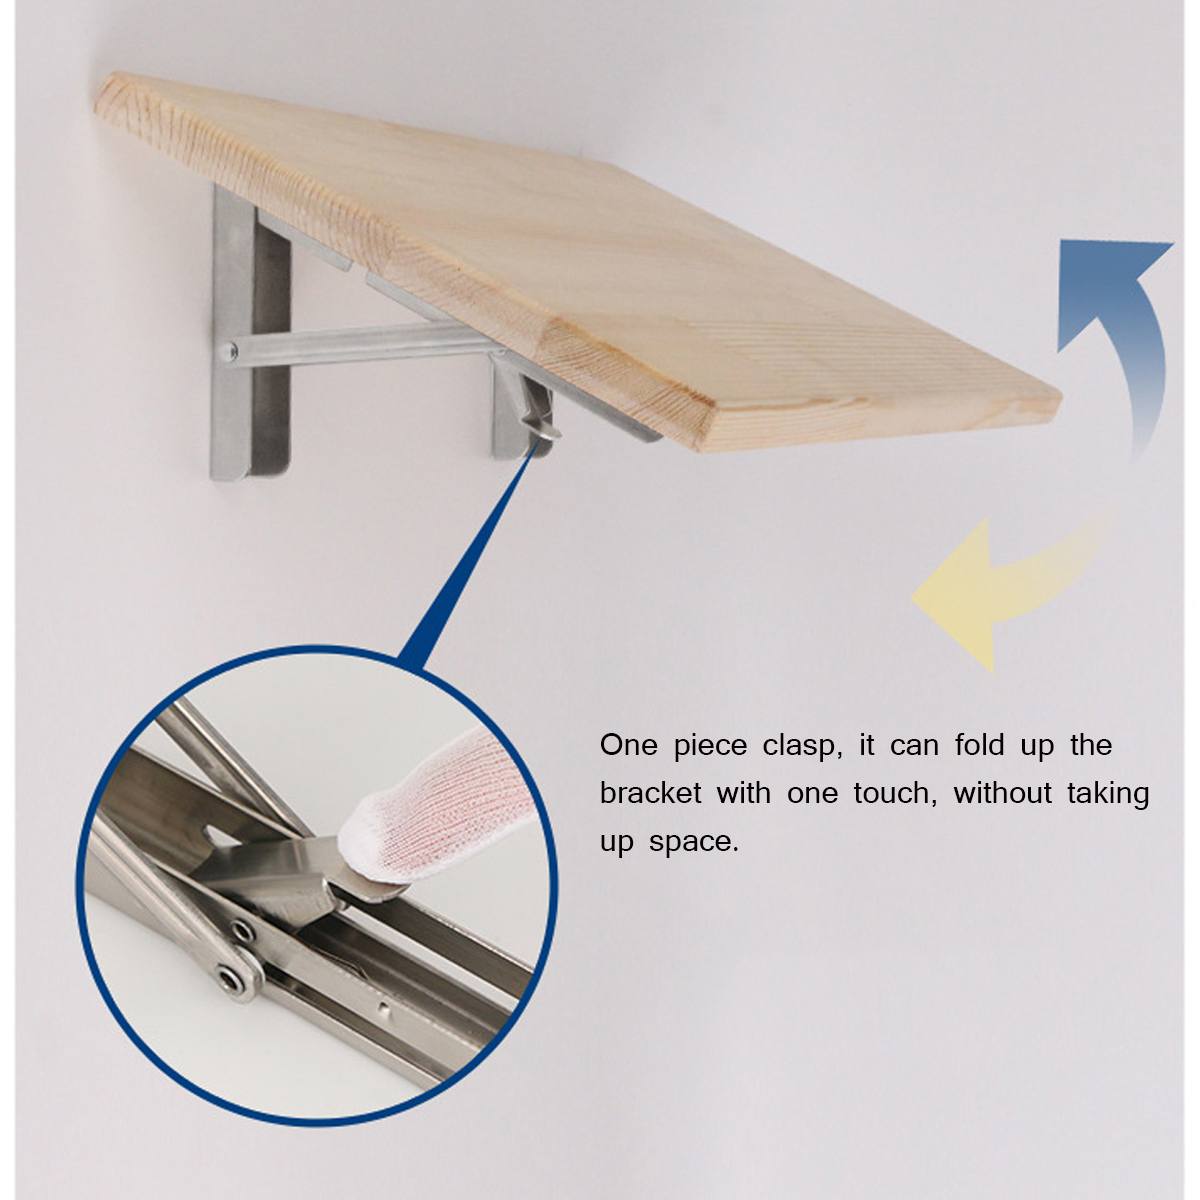 2Pcs 8-14 Inch Triangle Folding Angle Bracket Adjustable Wall Mounted Bench Table Shelf Heavy Support Home Furniture Hardware